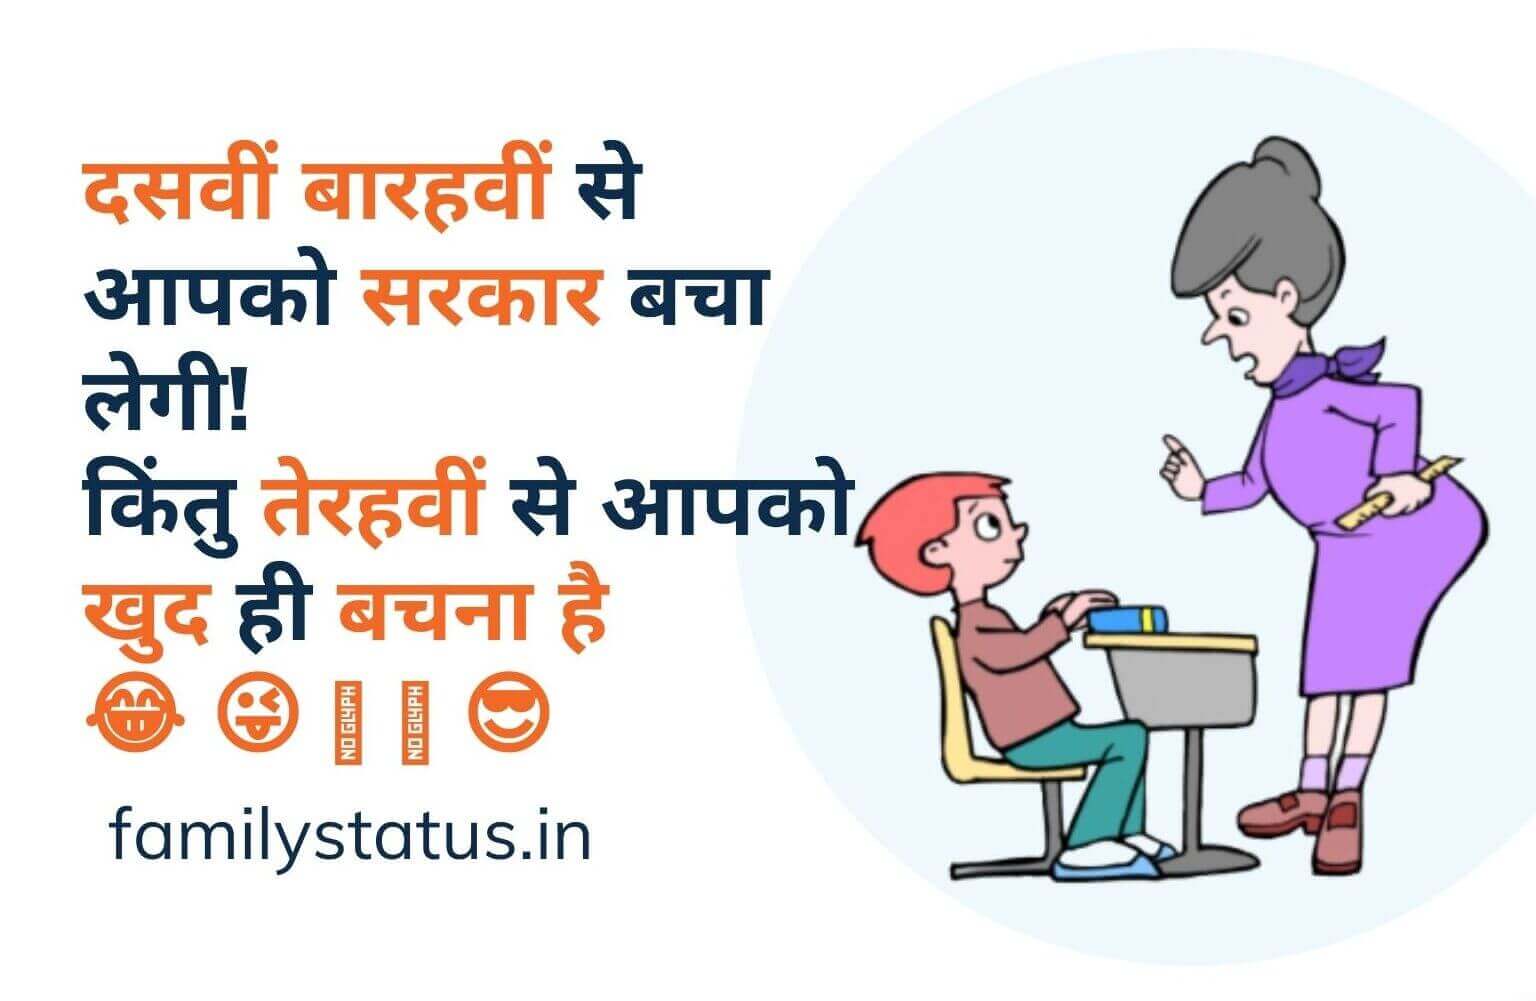 Best teacher and student jokes in hindi for whatsapp group